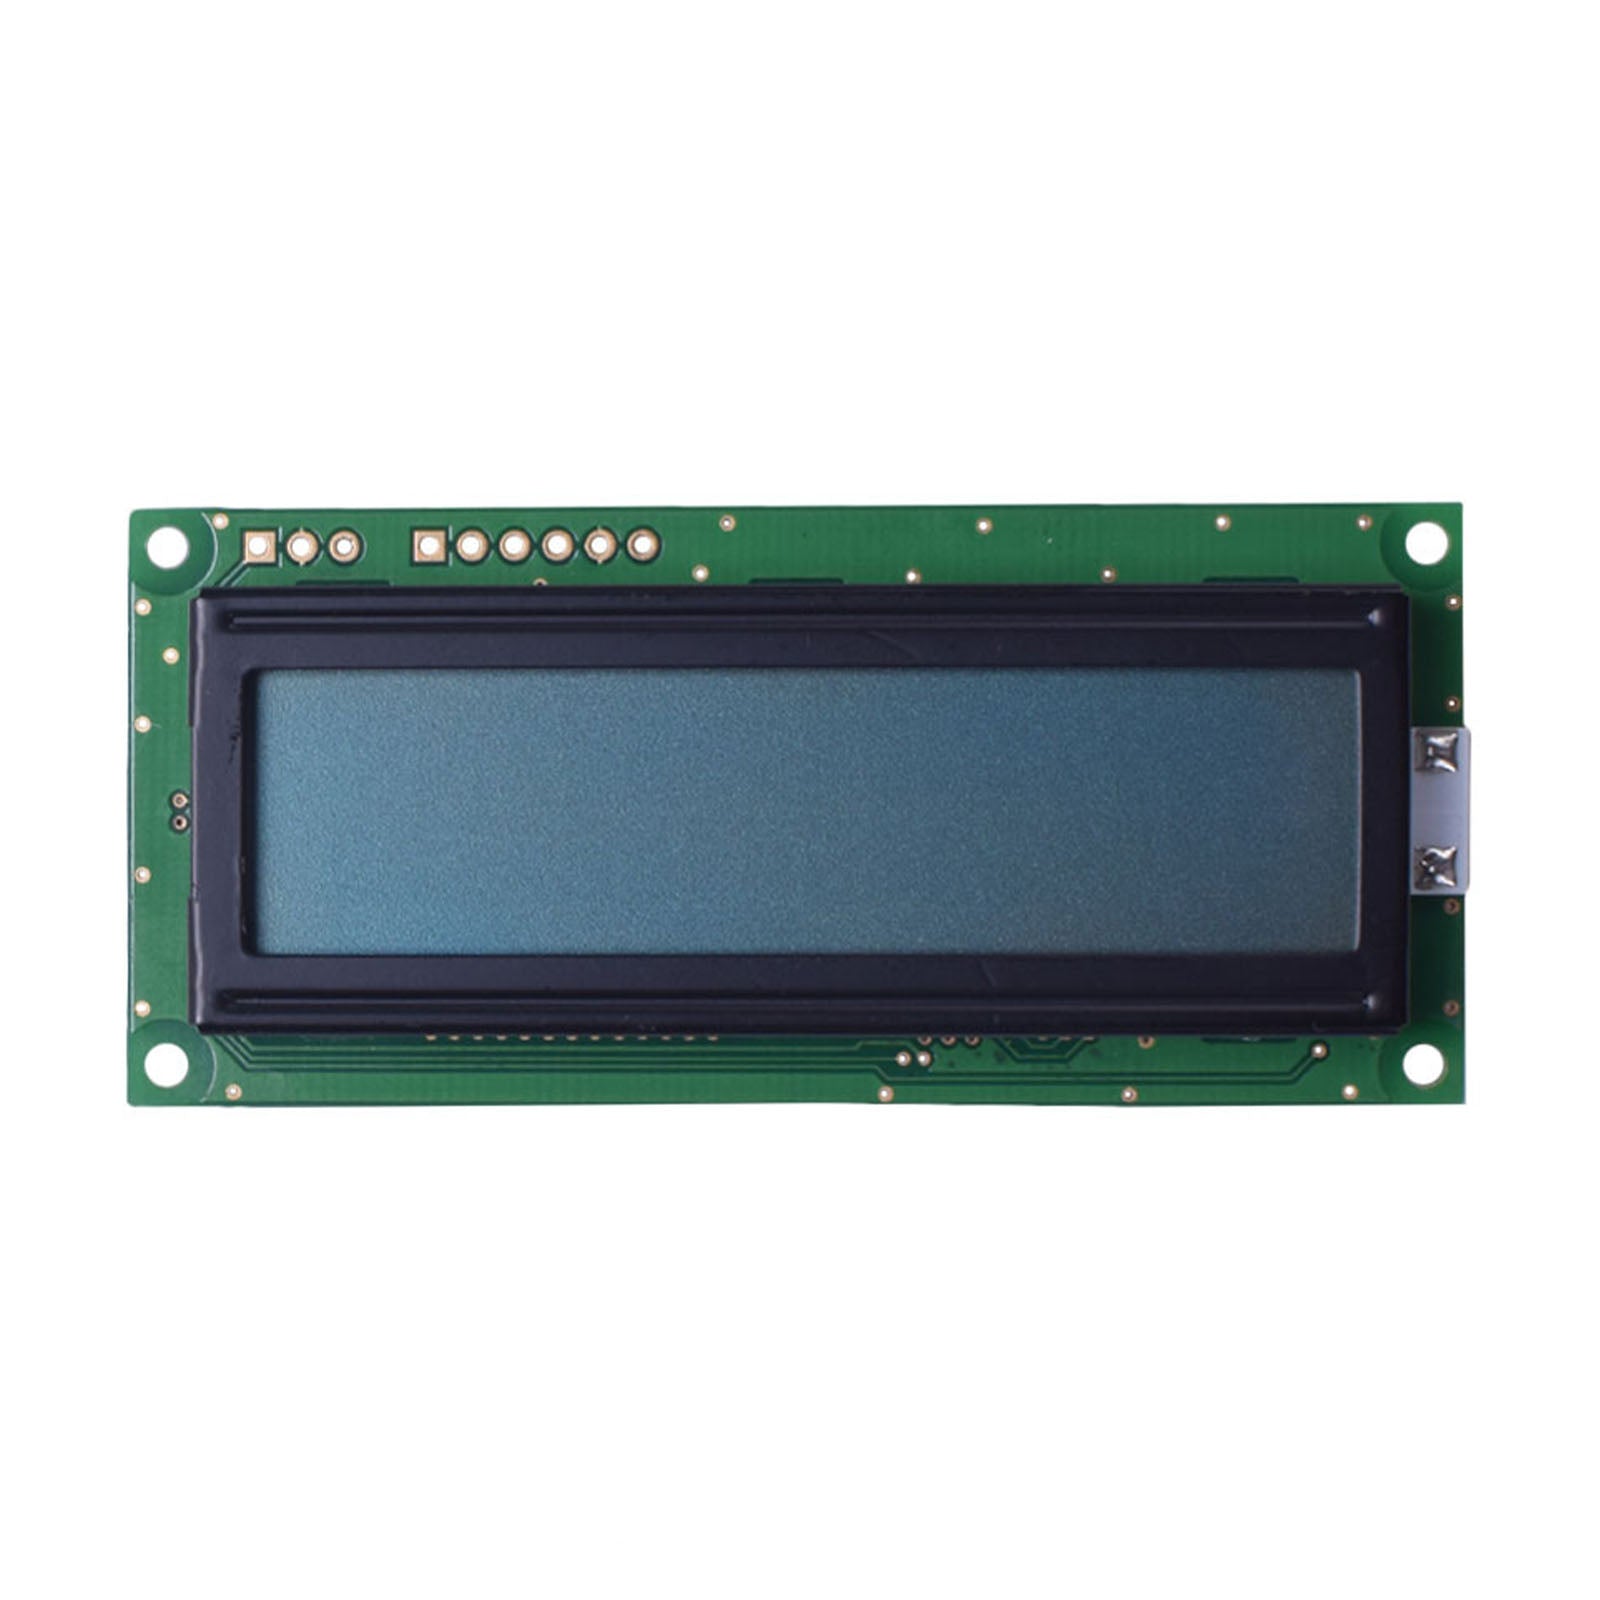 16x2 character gray LCD module with STN transflective technology and MCU interface